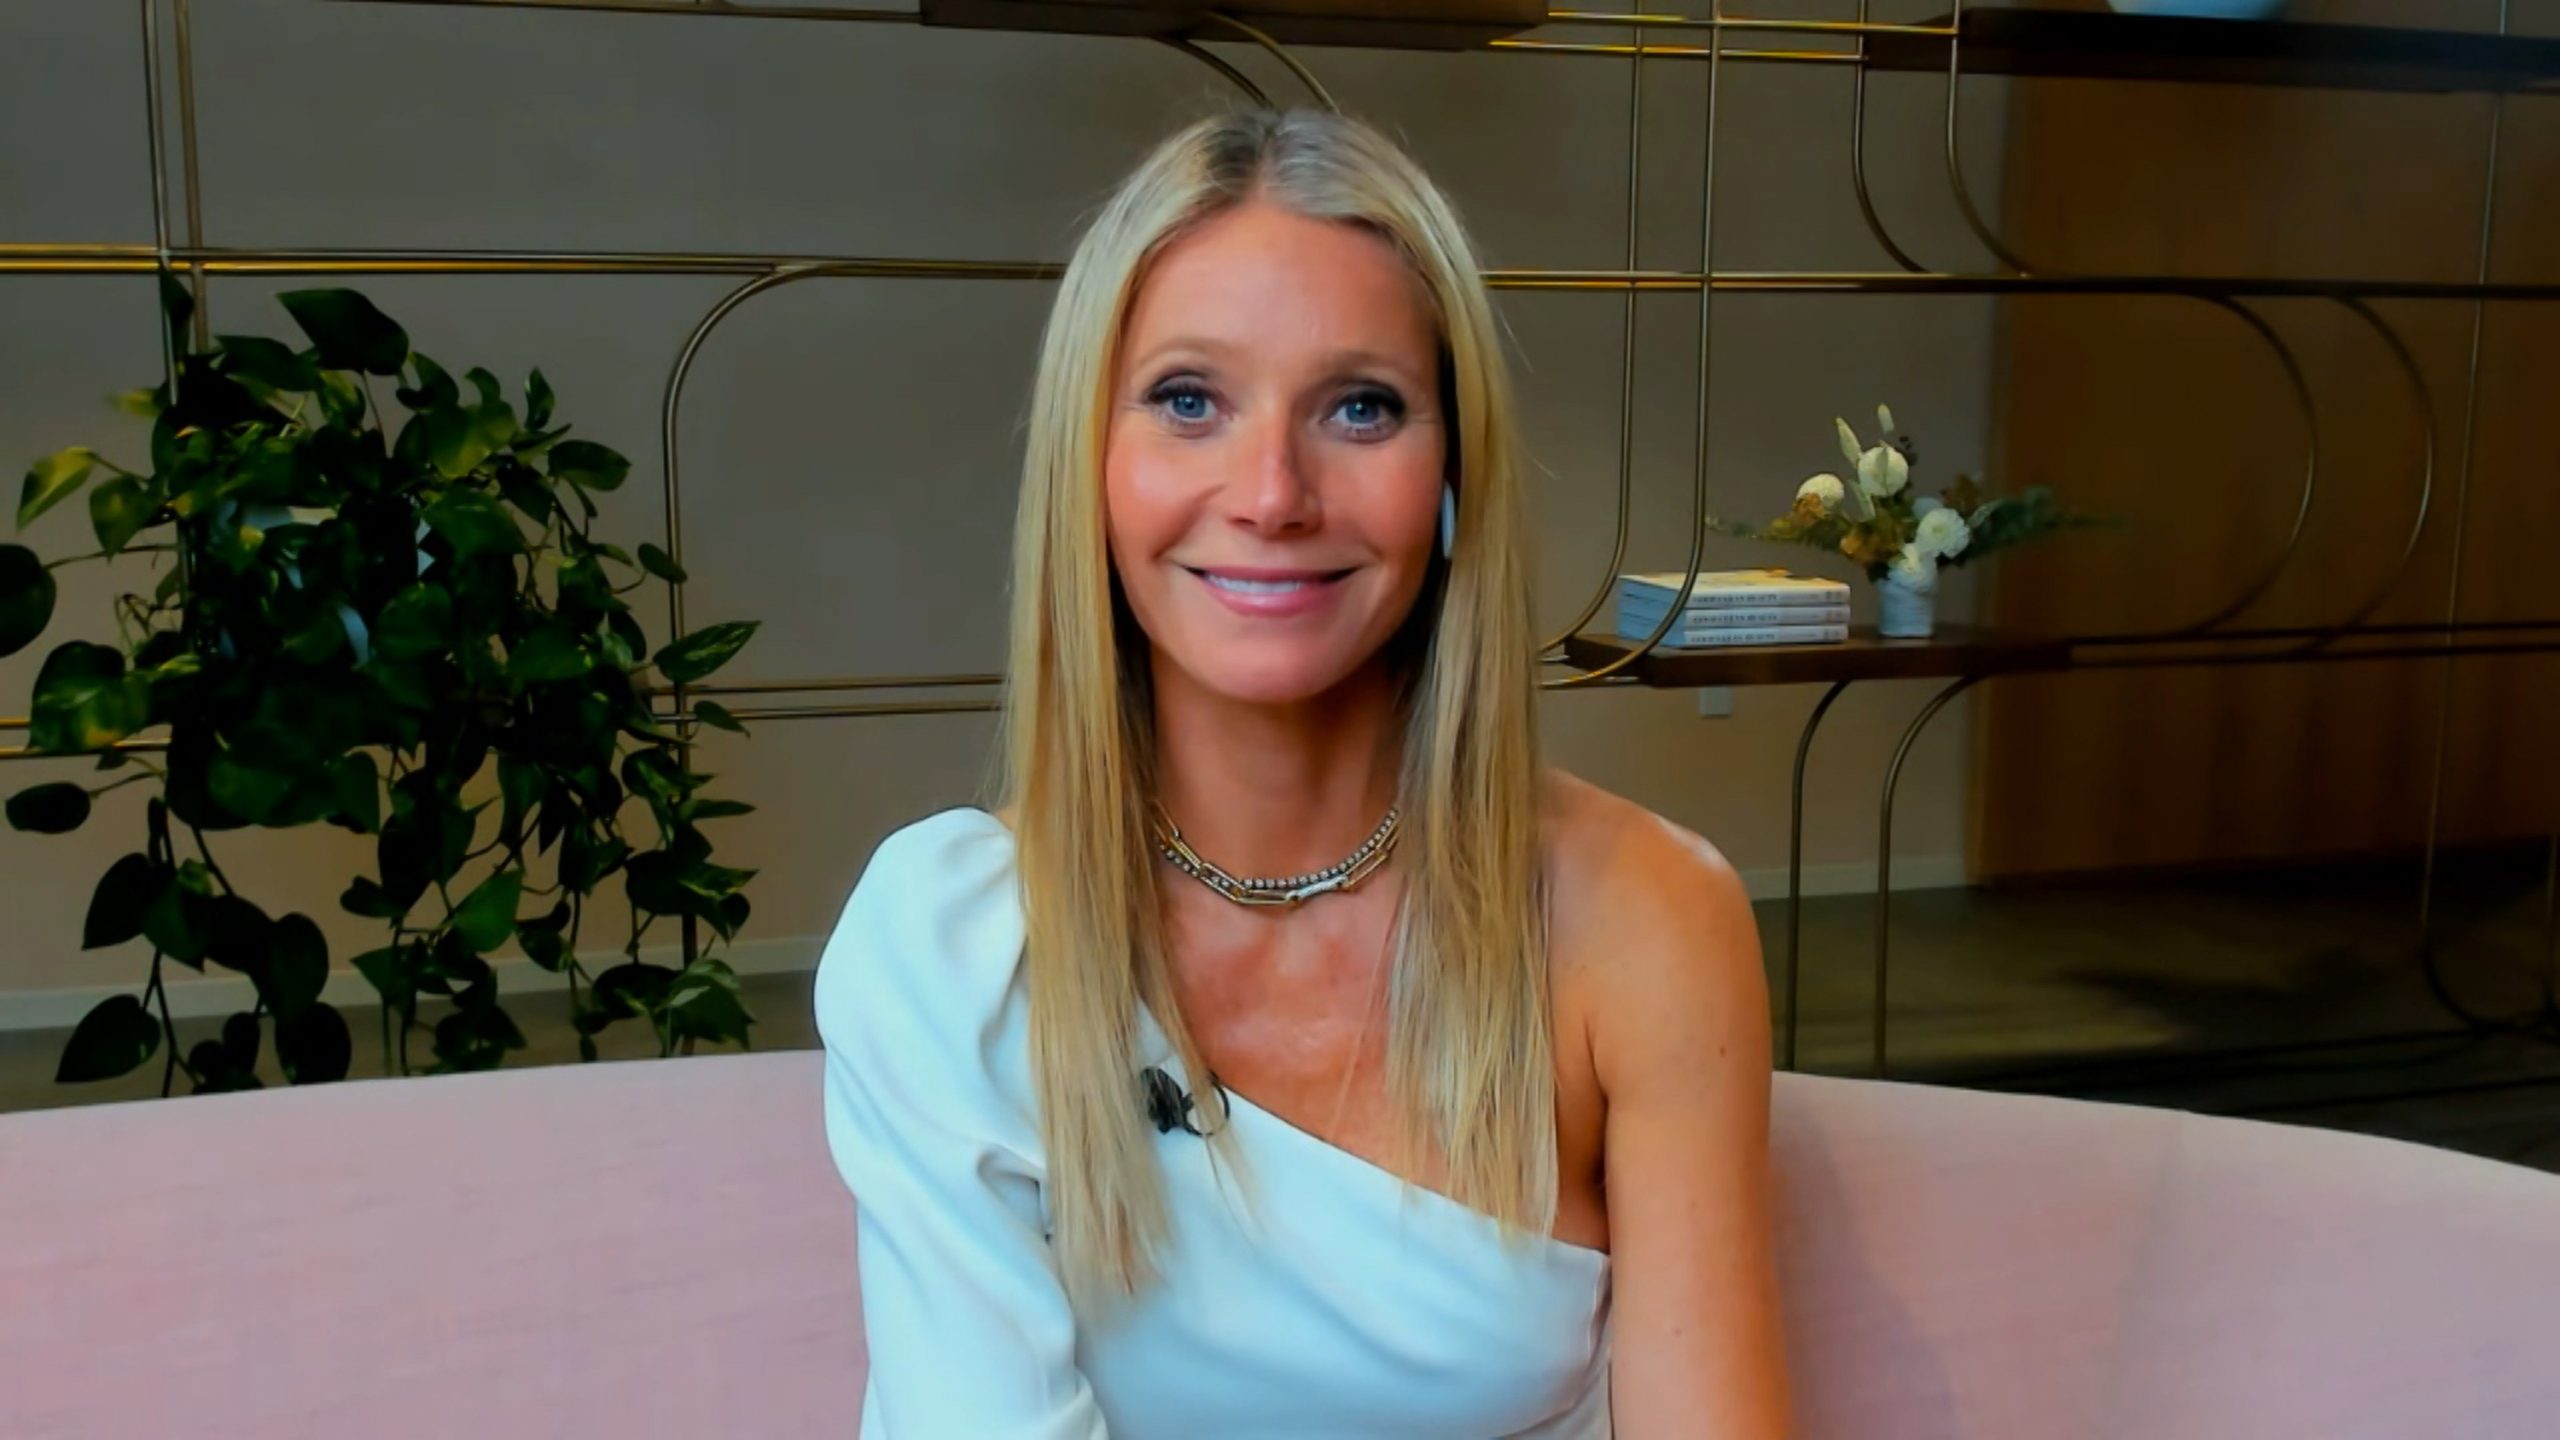 Gwyneth Paltrow Was Finally Asked About the ‘RHONY’ Scary Island Feud Between Bethenny Frankel and Kelly Bensimon